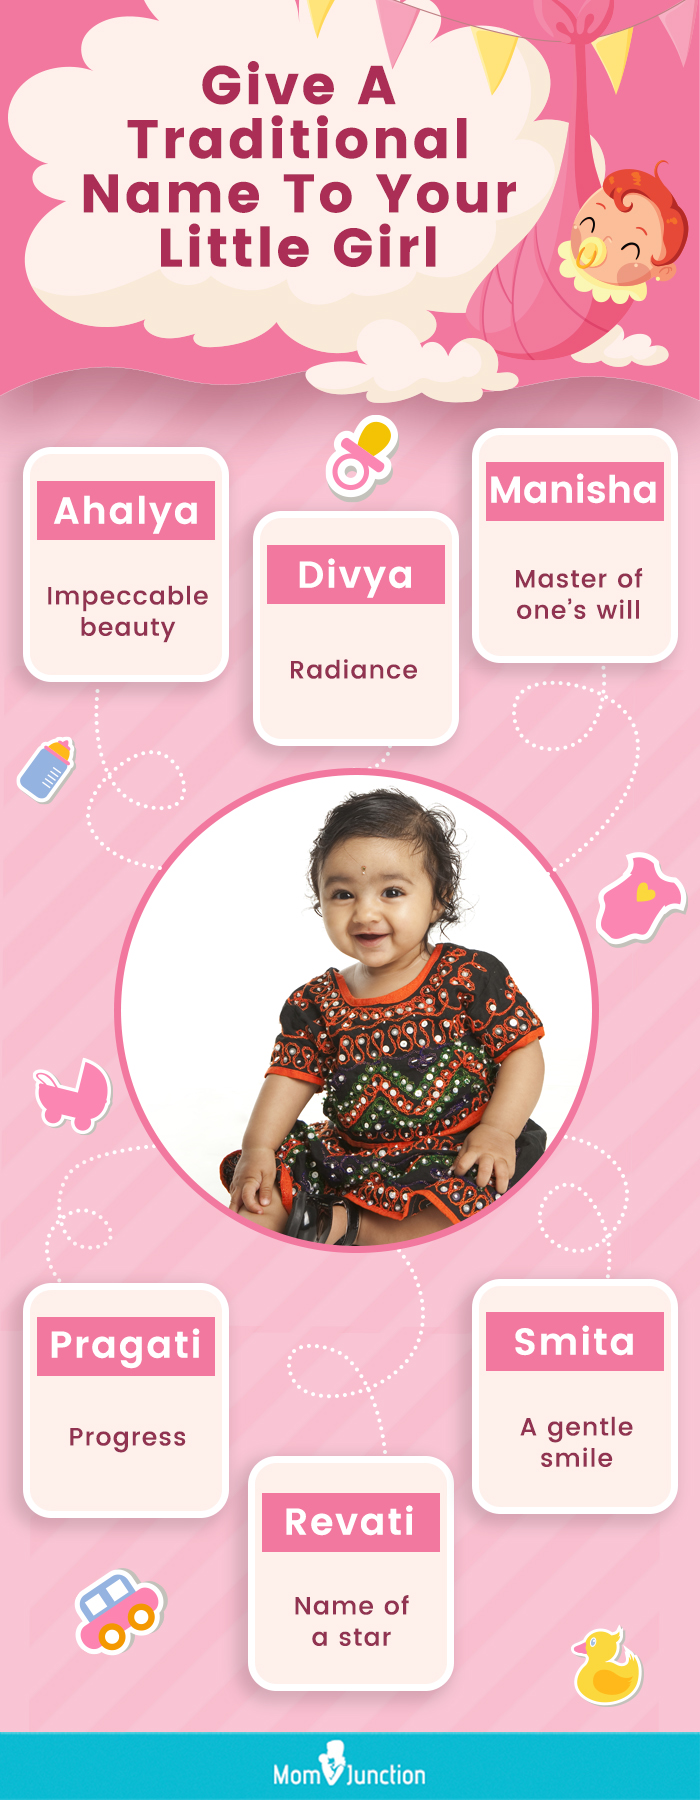 give a traditional name to your little girl [infographic]